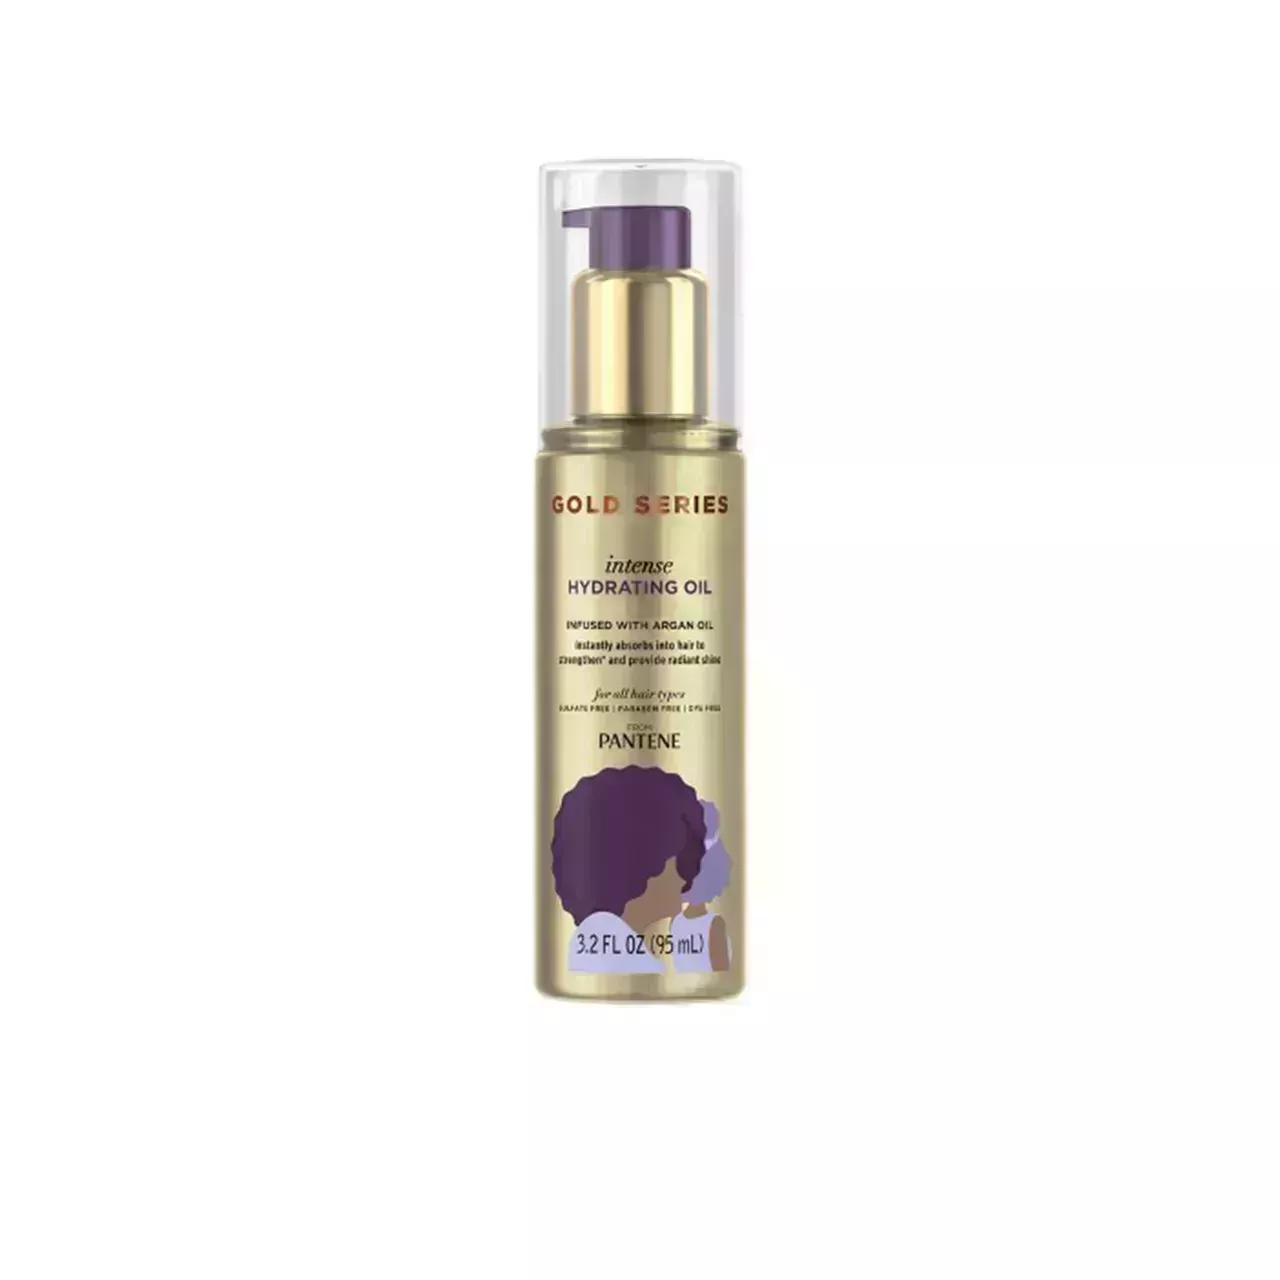 pantene Gold Series Intense Hydrating Oil on white background